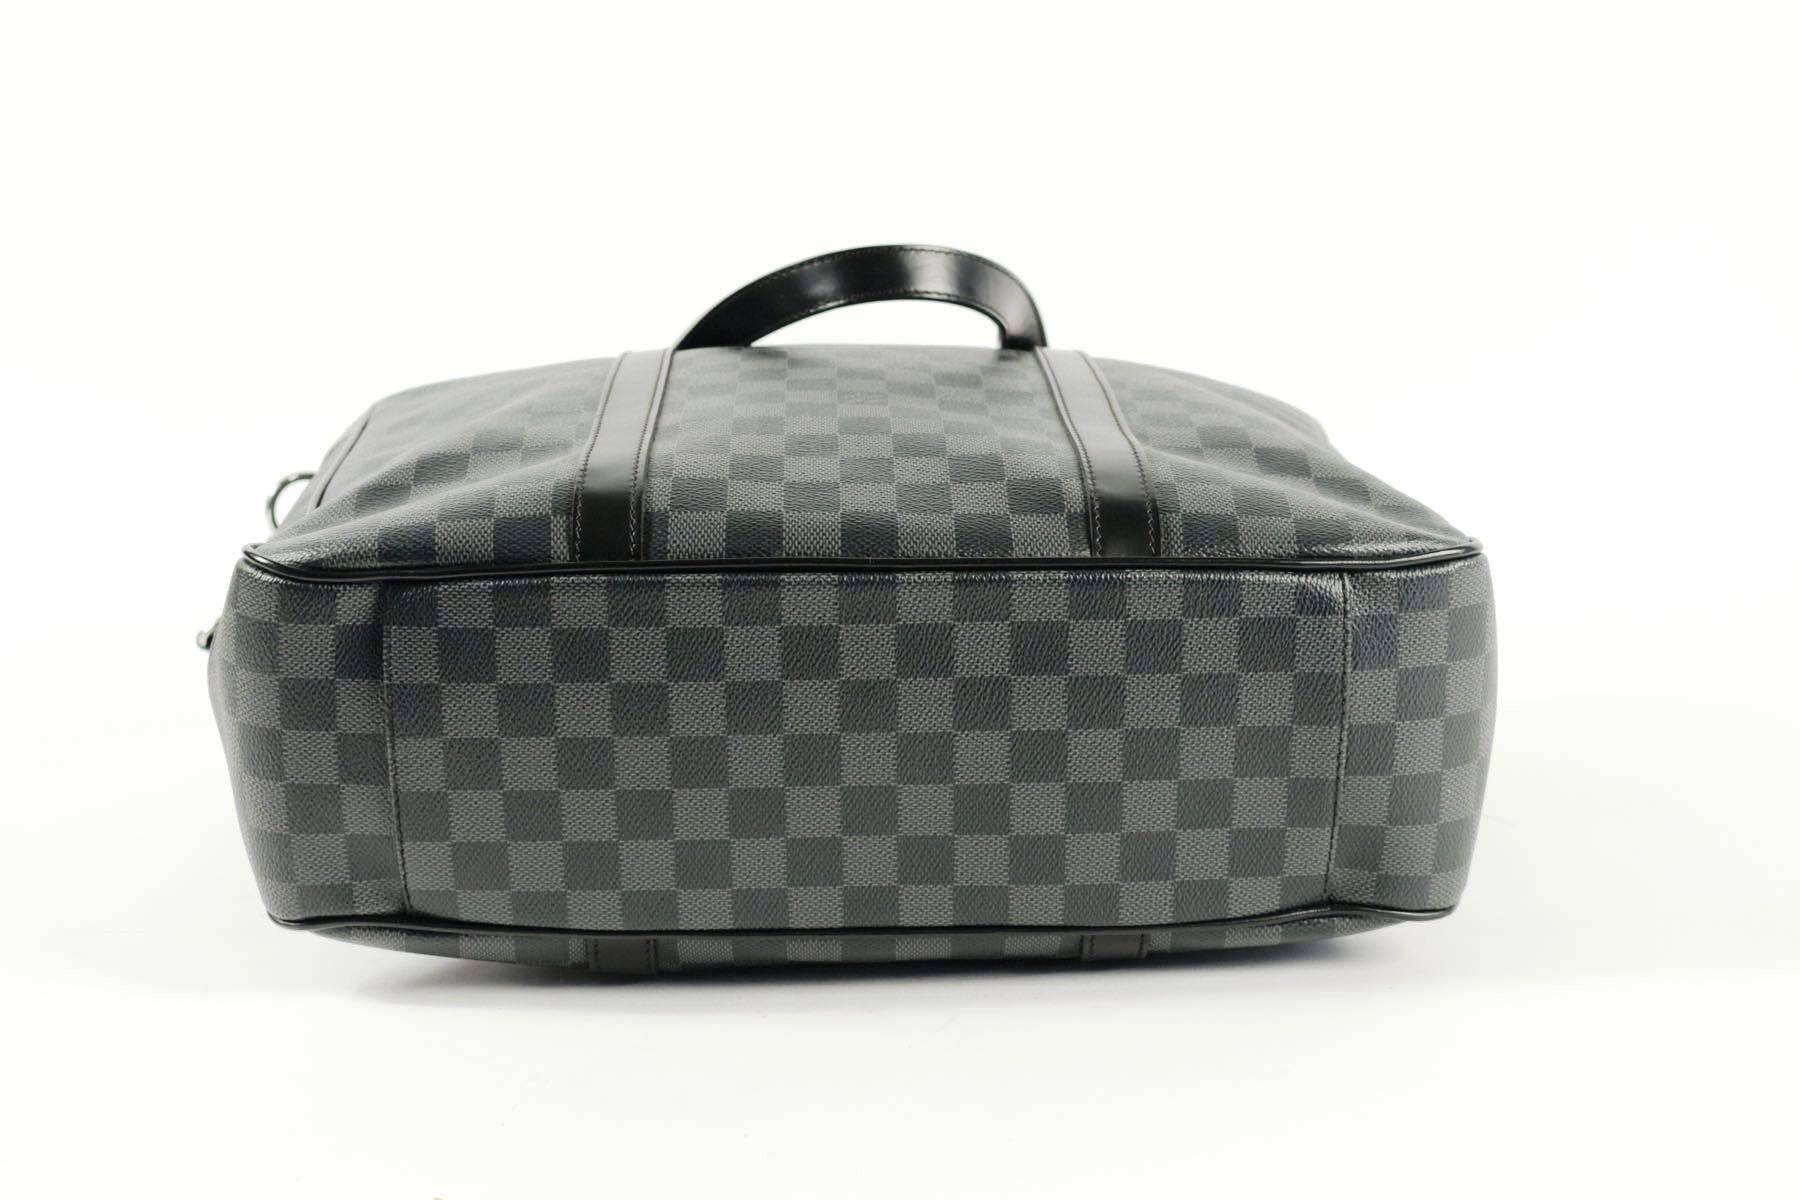 Pre-owned Tadao bag by Louis Vuitton, grey and black.